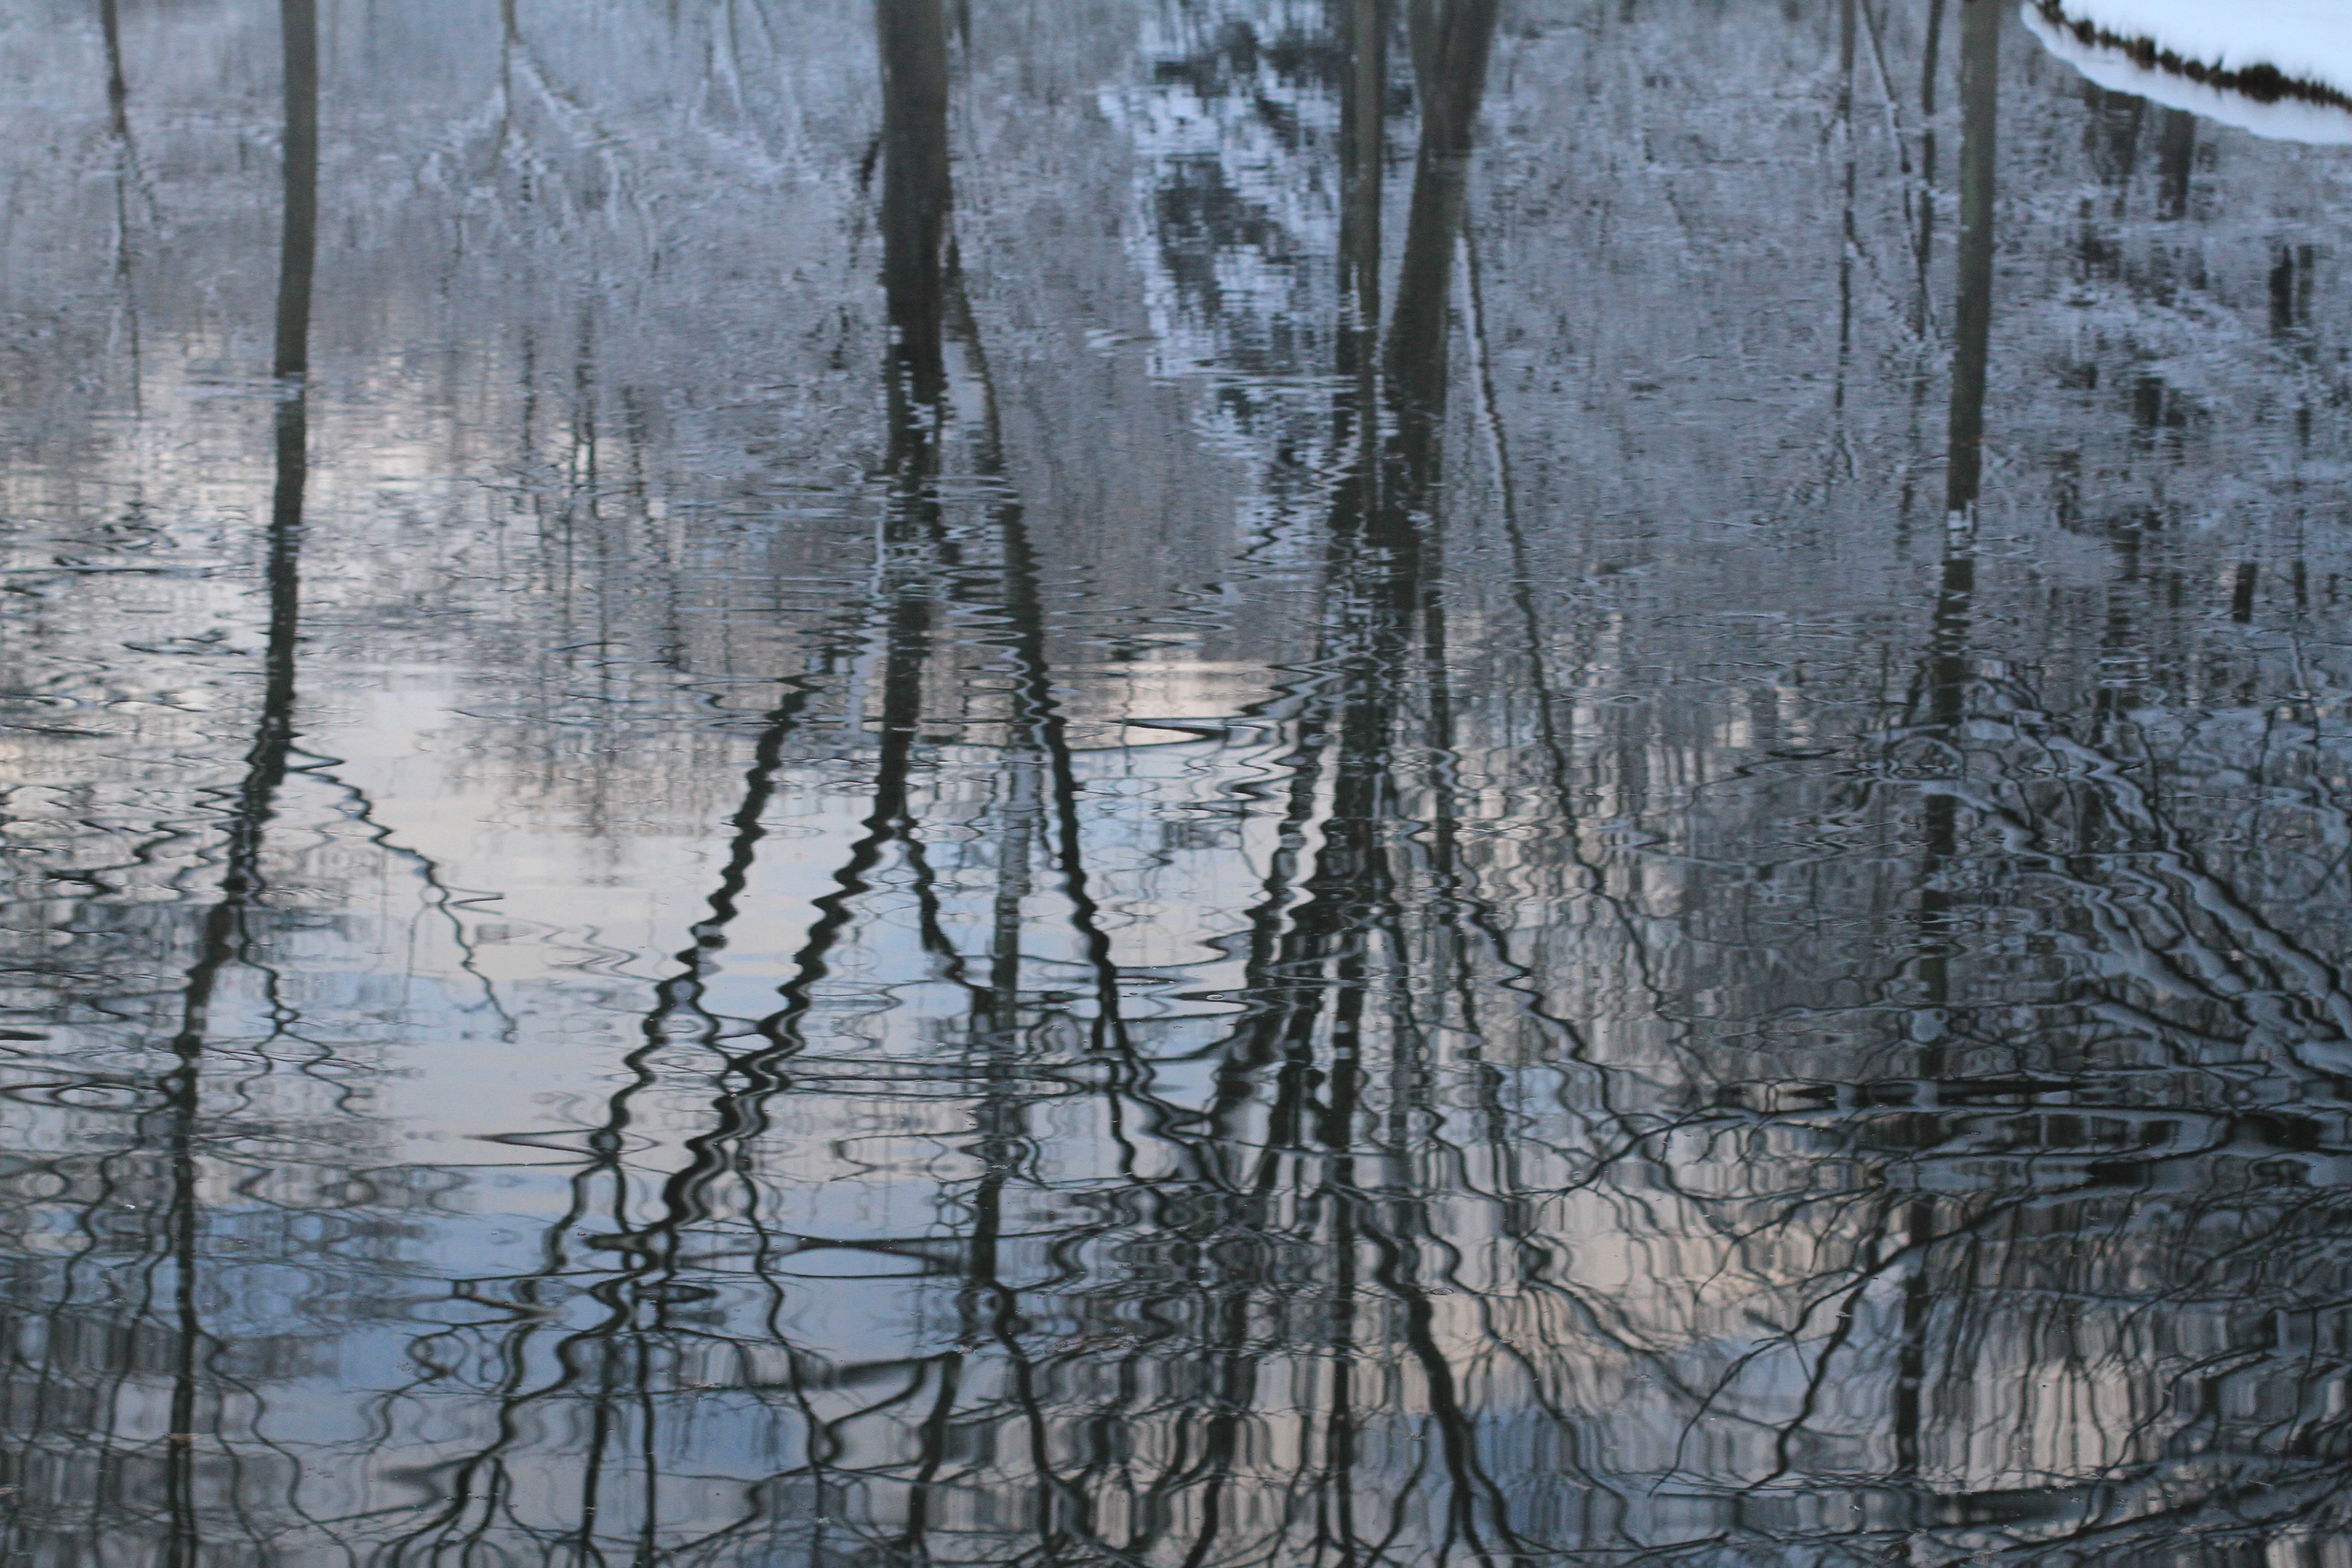 Reflections in Pond